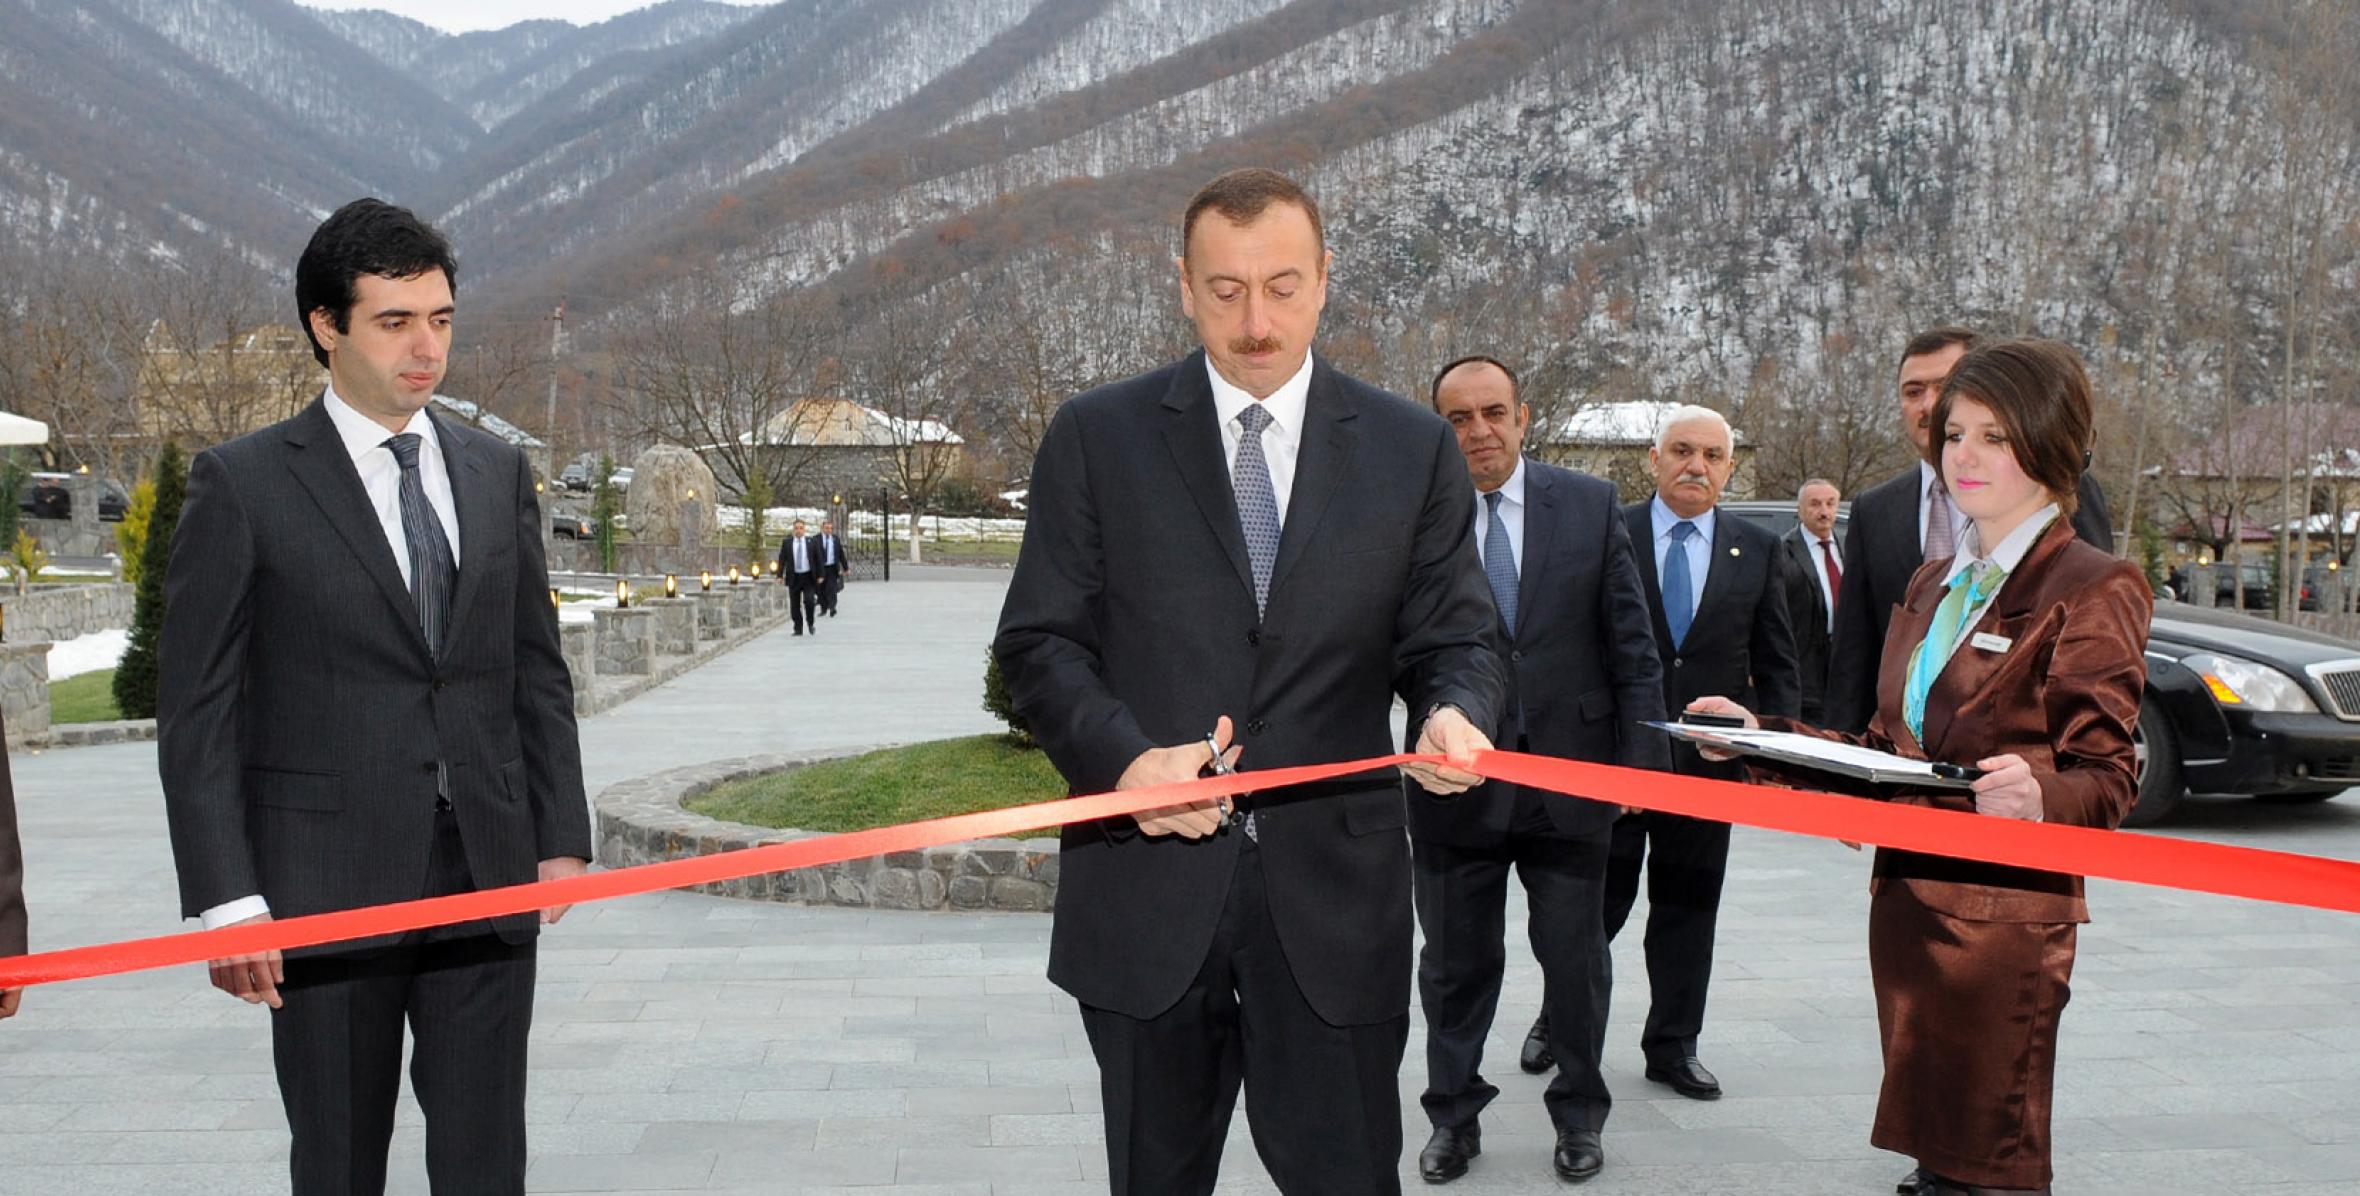 Ilham Aliyev attended the opening of the El Resort hotel in Gakh